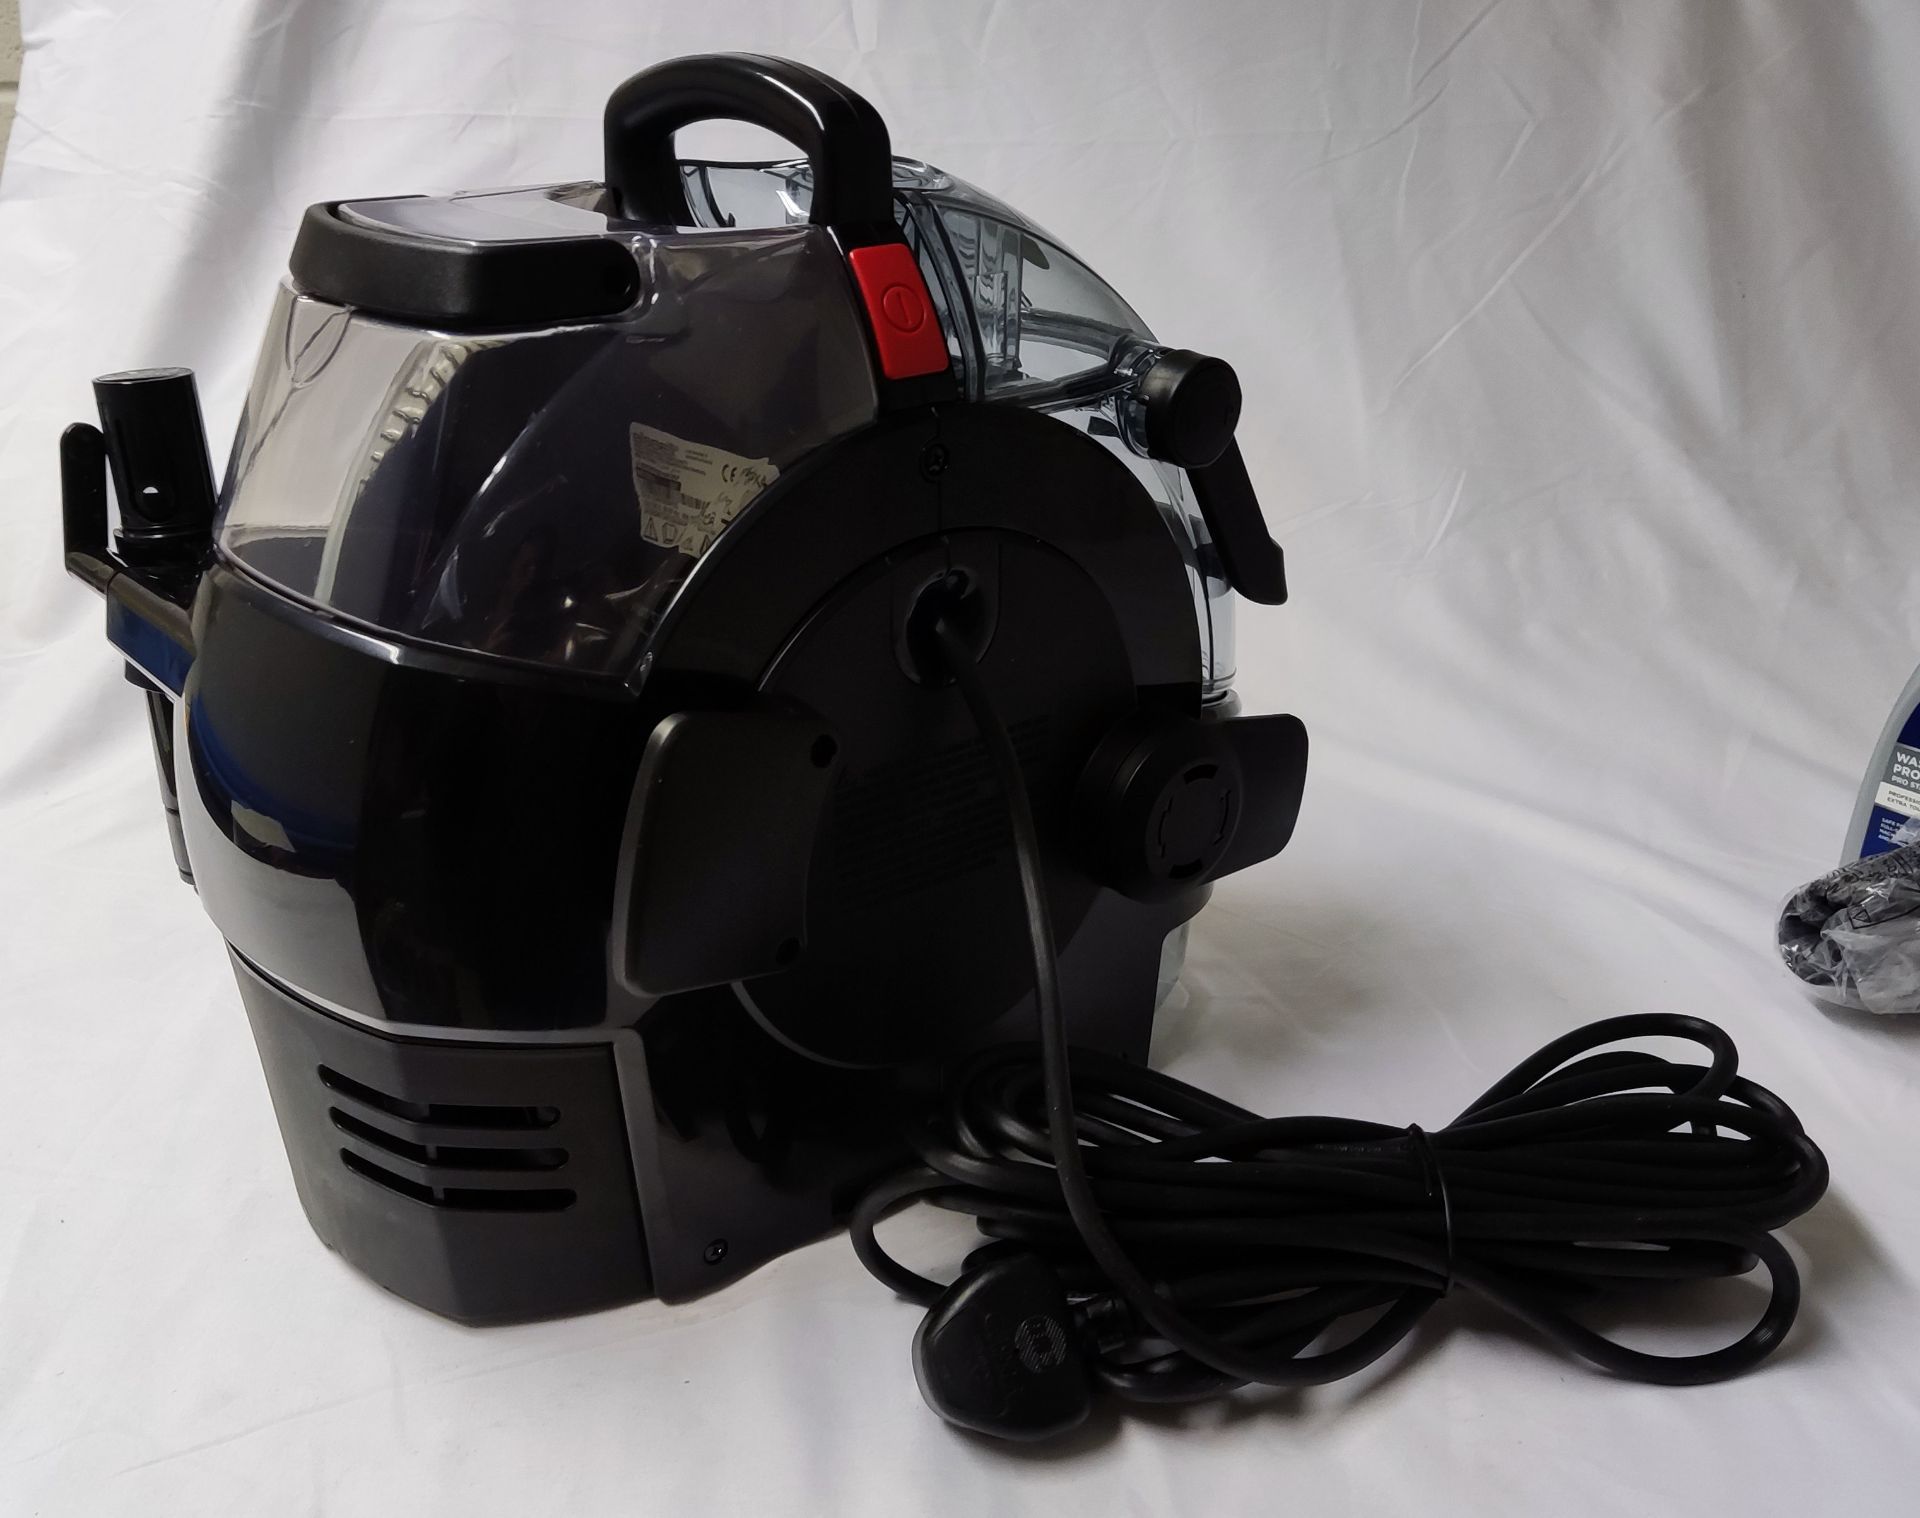 1 x BISSELL Spotclean Pro Portable Carpet & Upholstery Washer - New/Boxed - RRP £179.99 - Ref: - Image 4 of 15